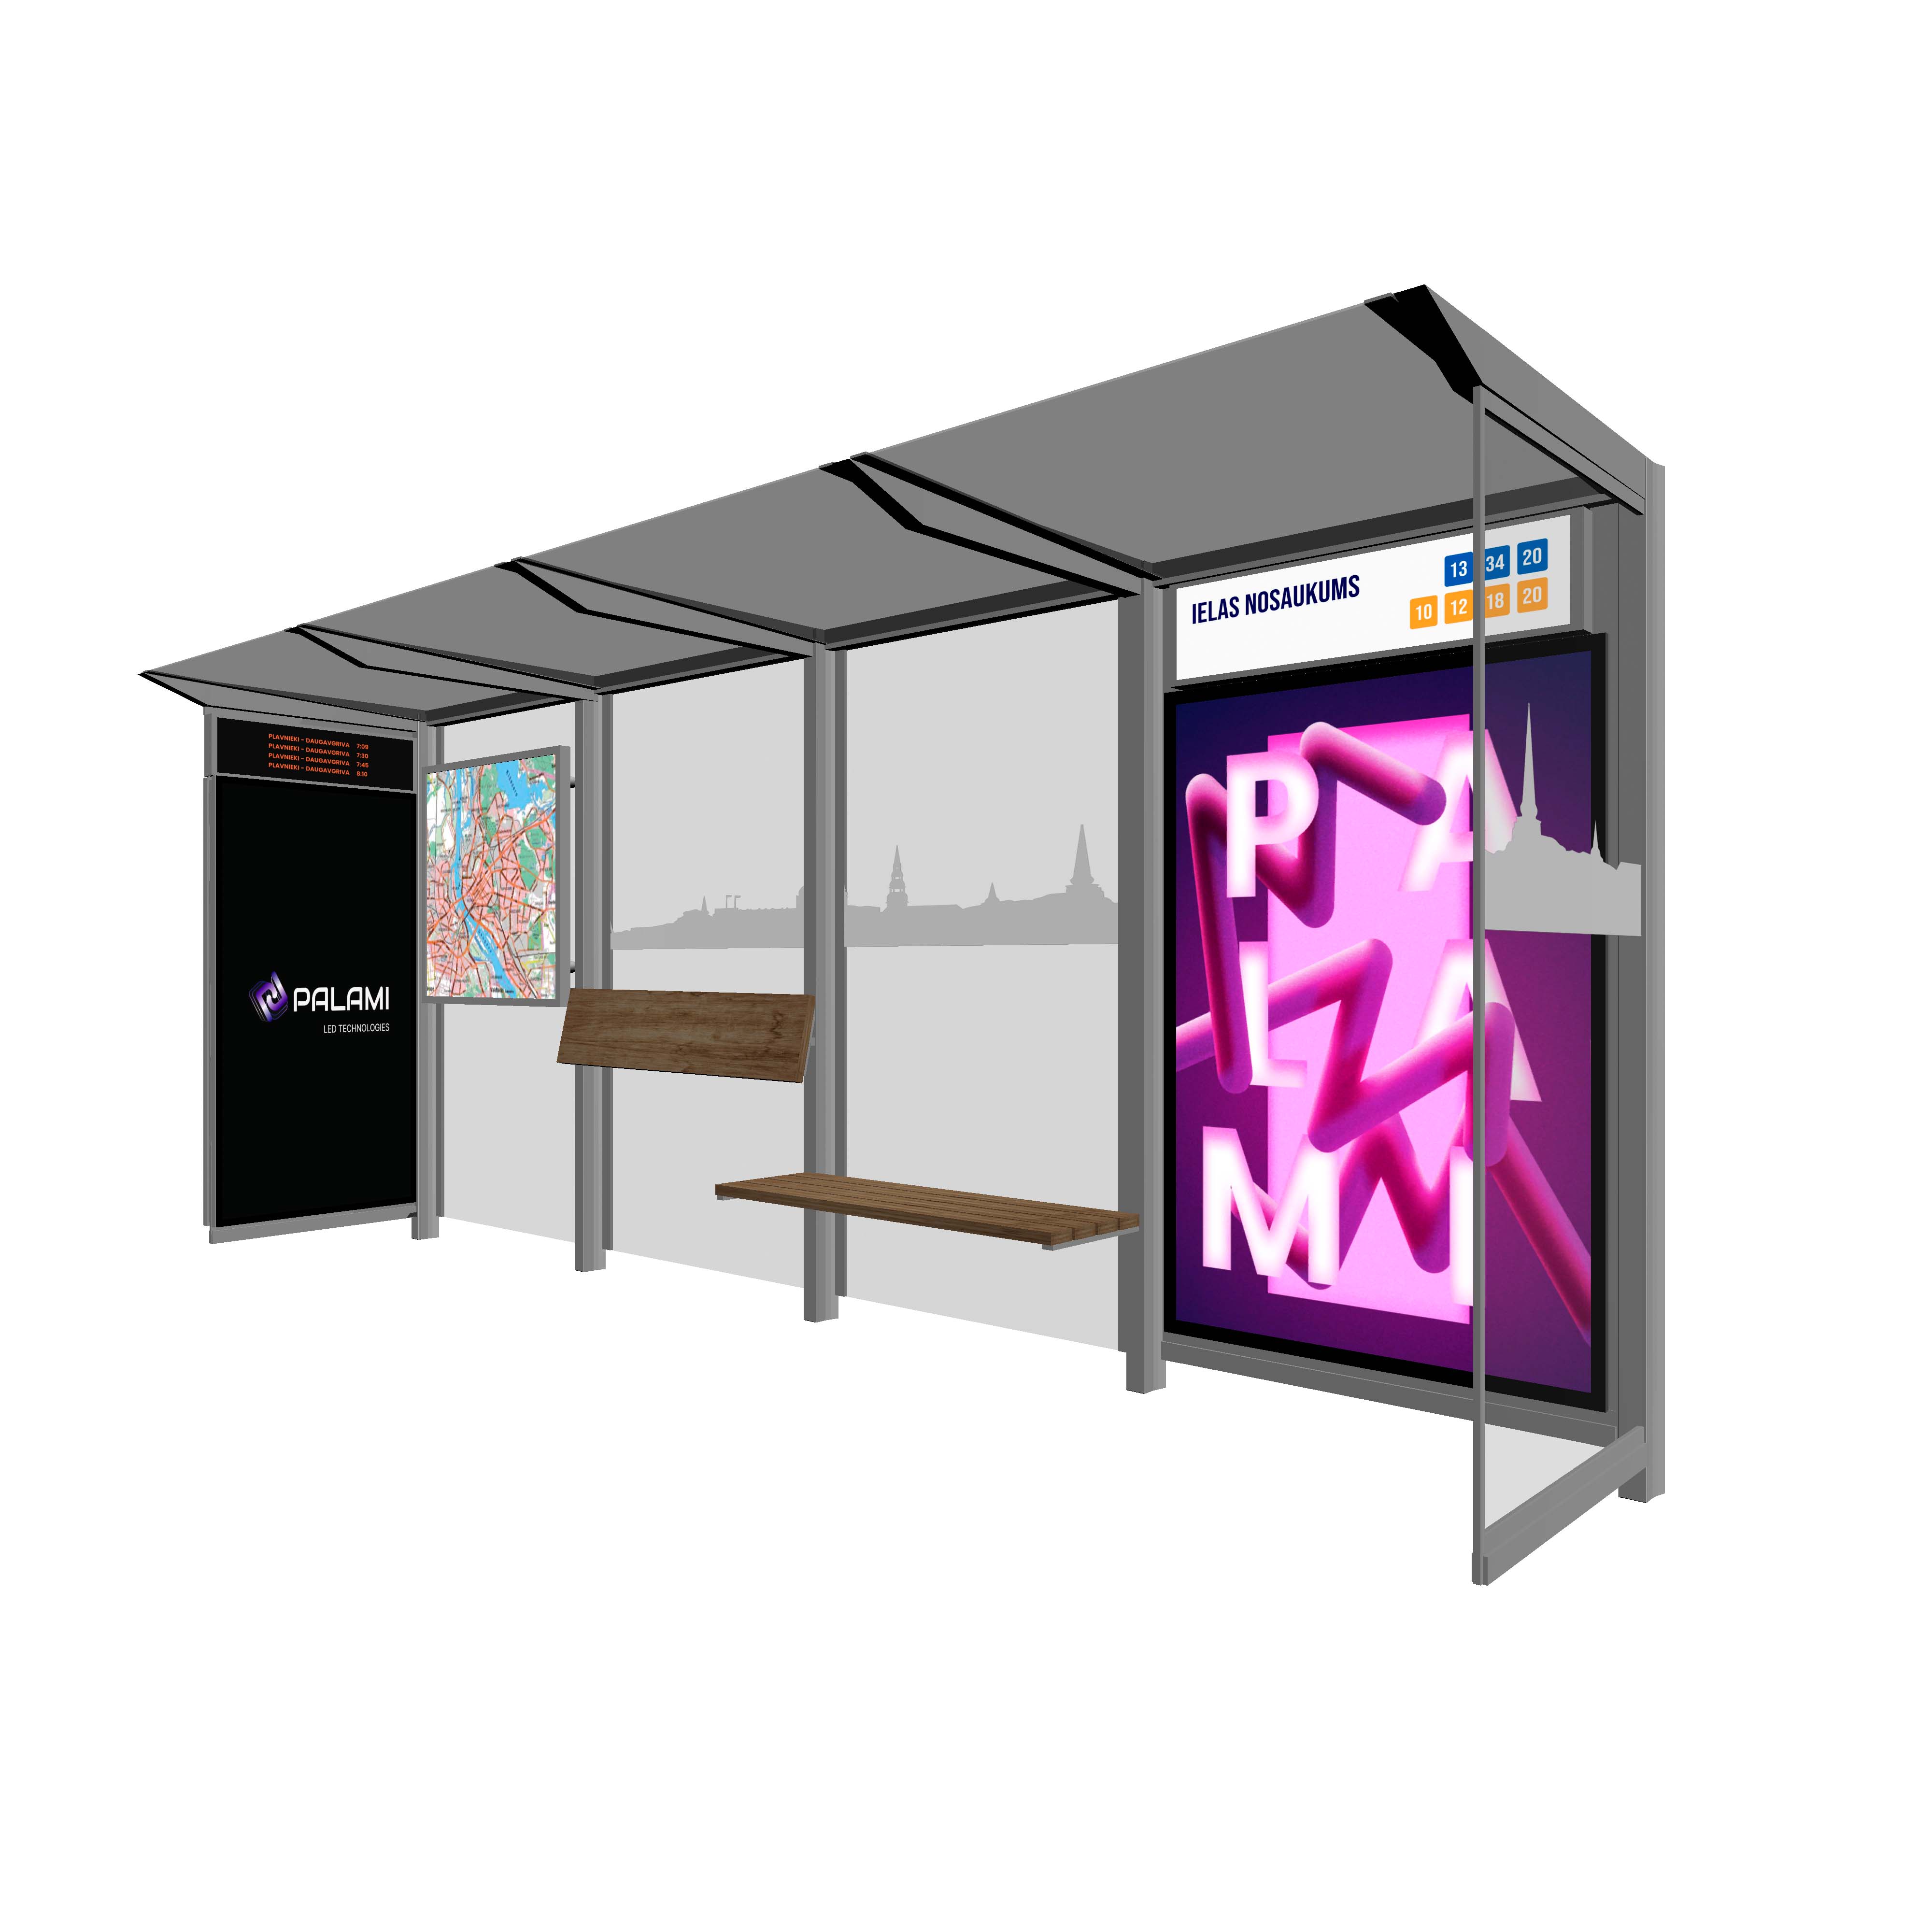 Bus Shelter RIGA XL-Size by PALAMI Group - Extremely Spacious And Maximum Visibility Outdoor Advertising Shelter